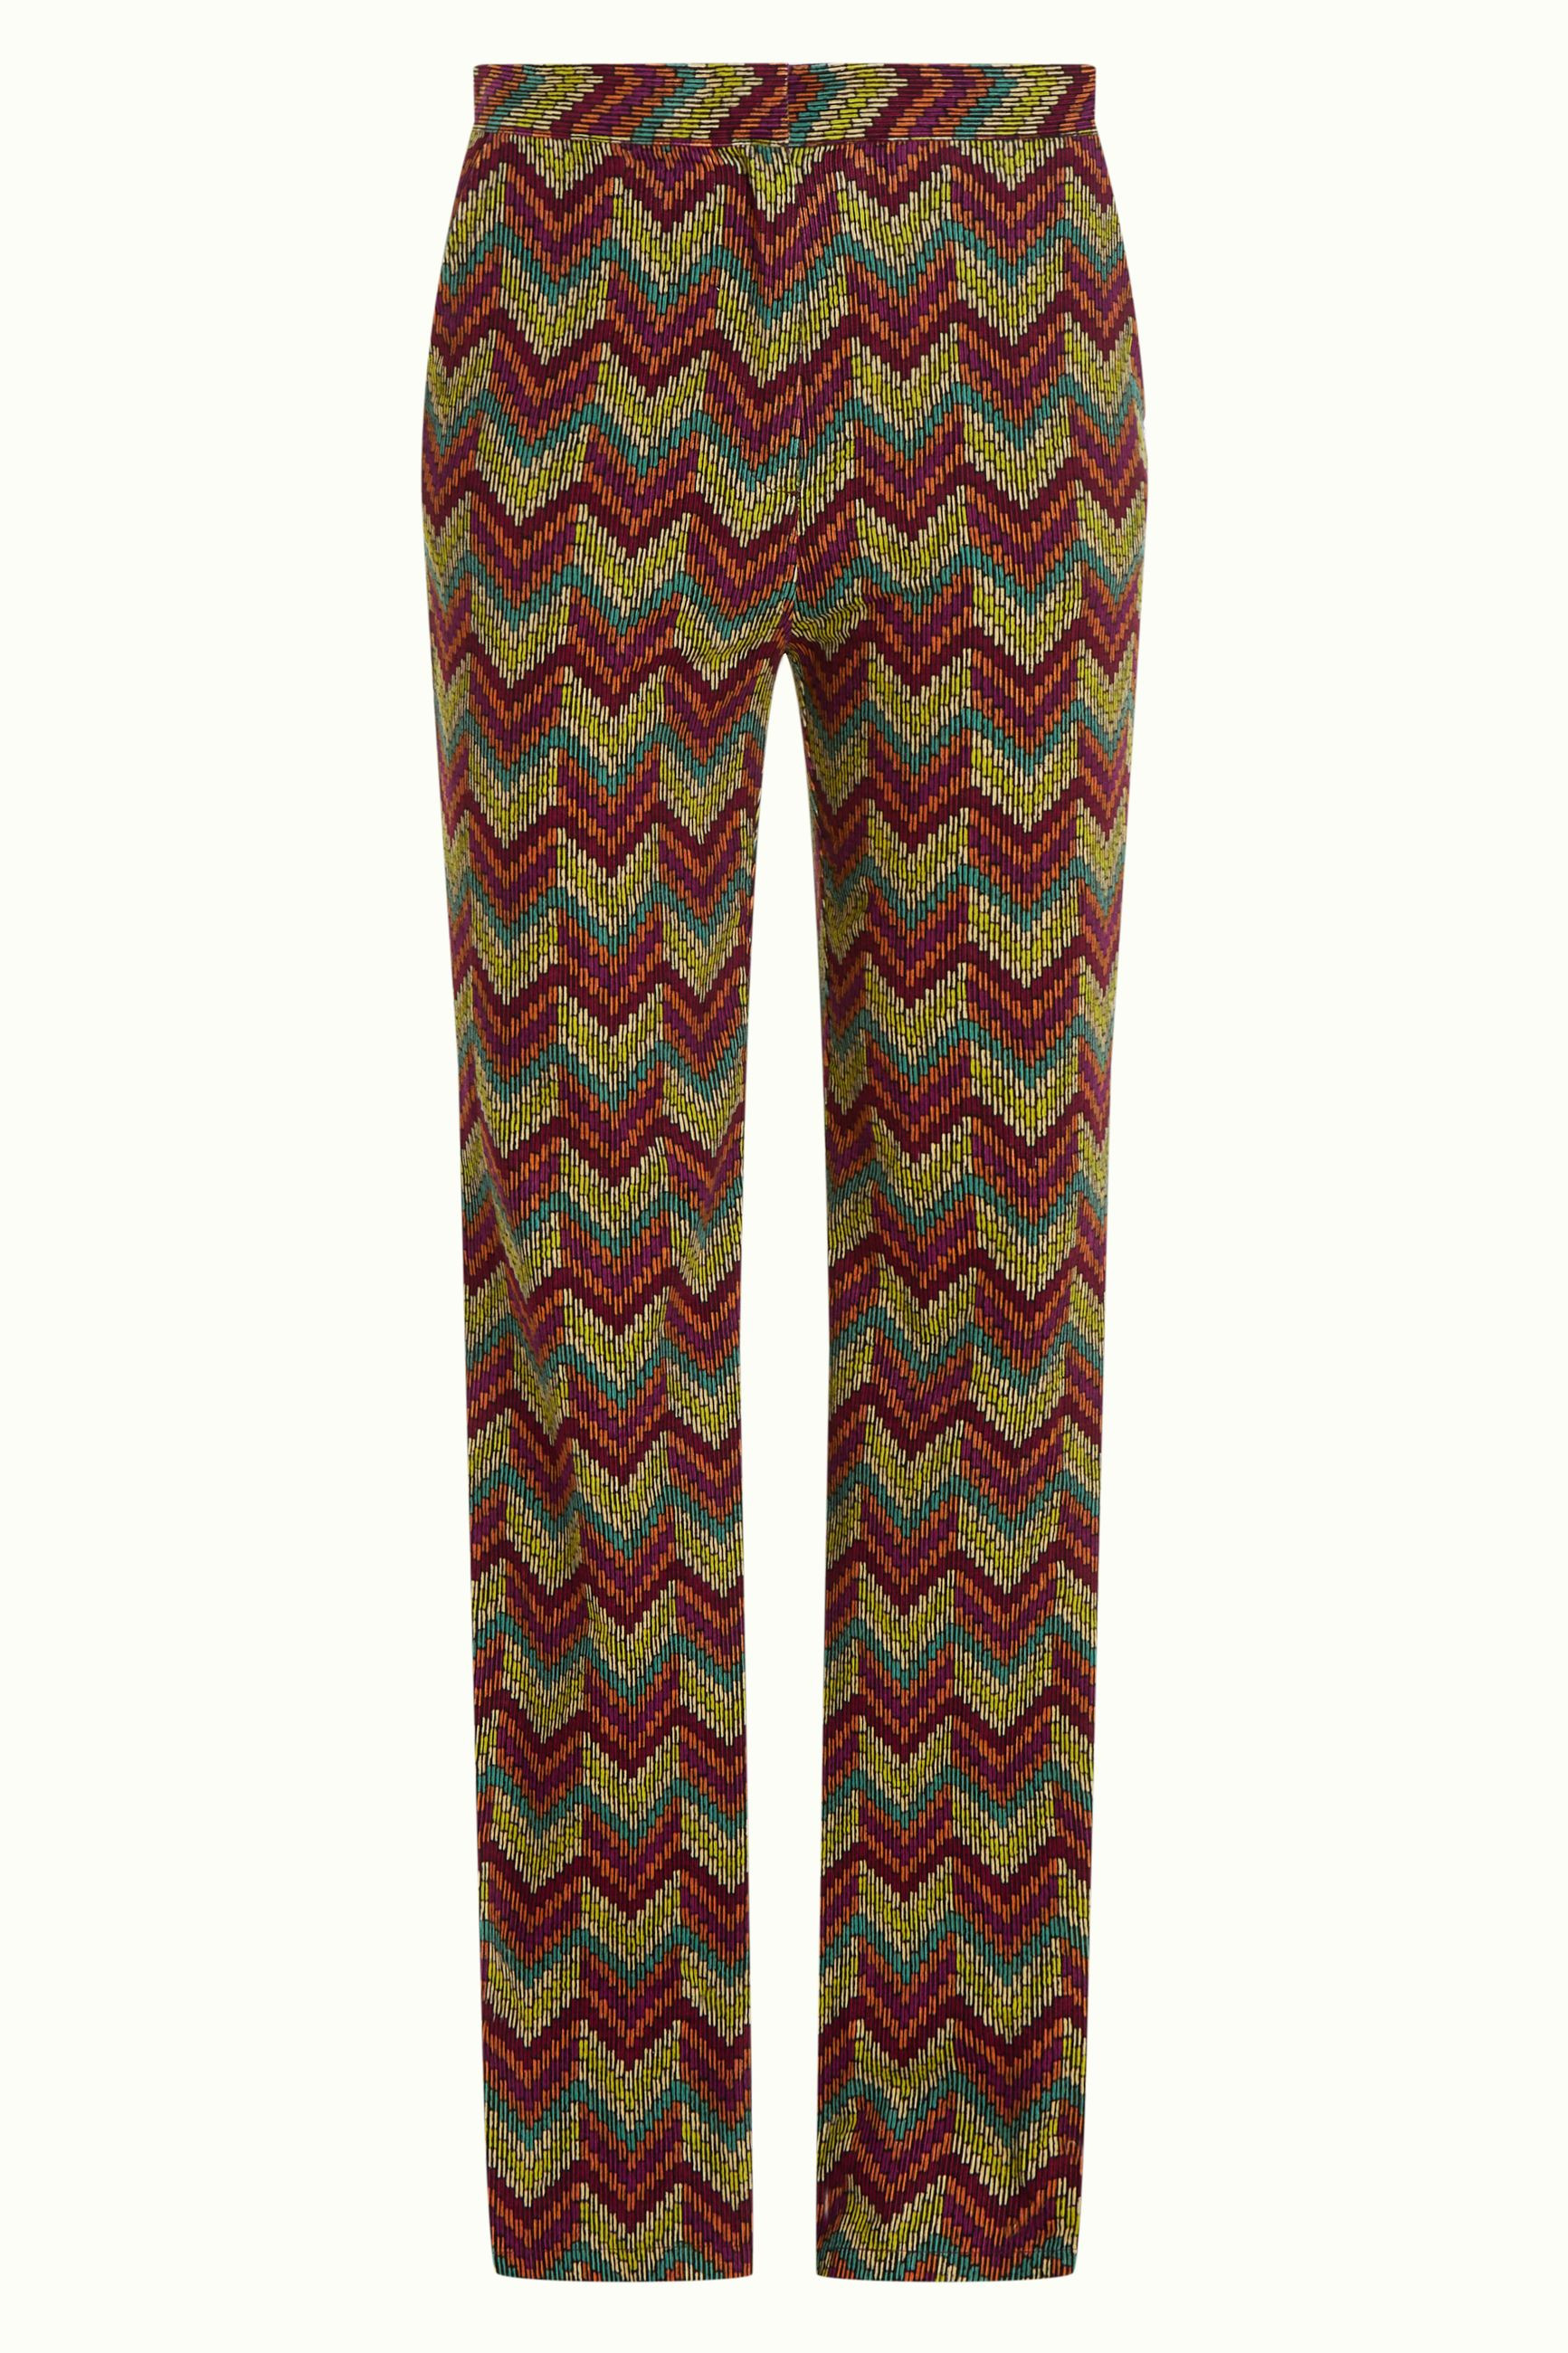 King Louie Hose Gael Pants Farley, Farbe: Cabernet Red